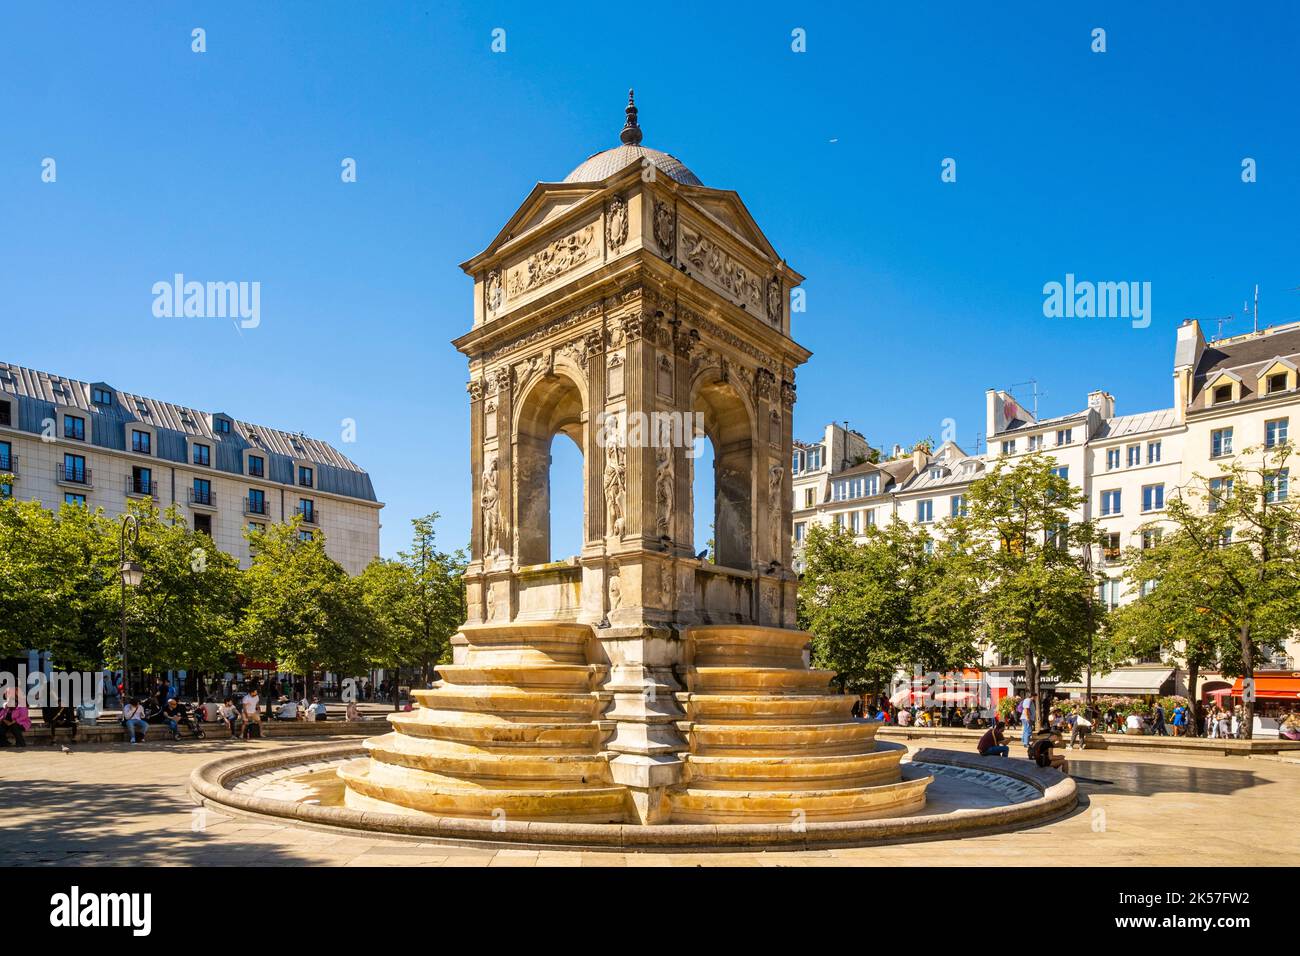 France, Paris, Chatelet district, place Joachim du Bellay, the Fountain of the Innocents Stock Photo